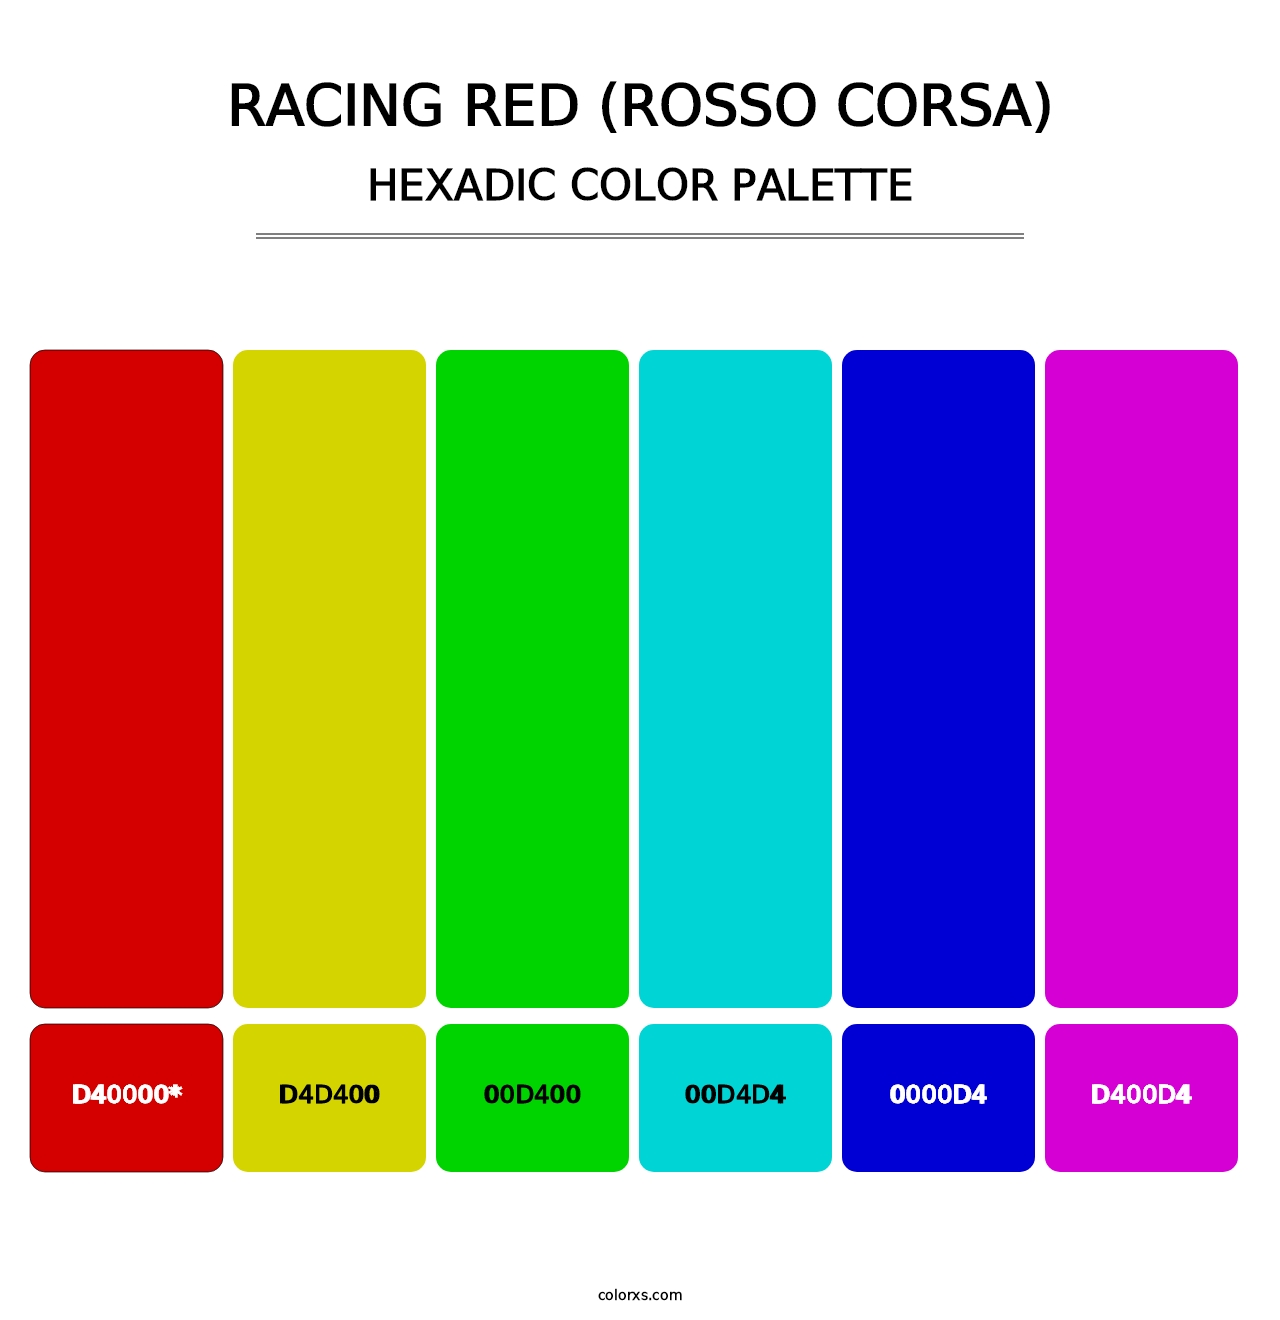 Racing Red (Rosso Corsa) - Hexadic Color Palette